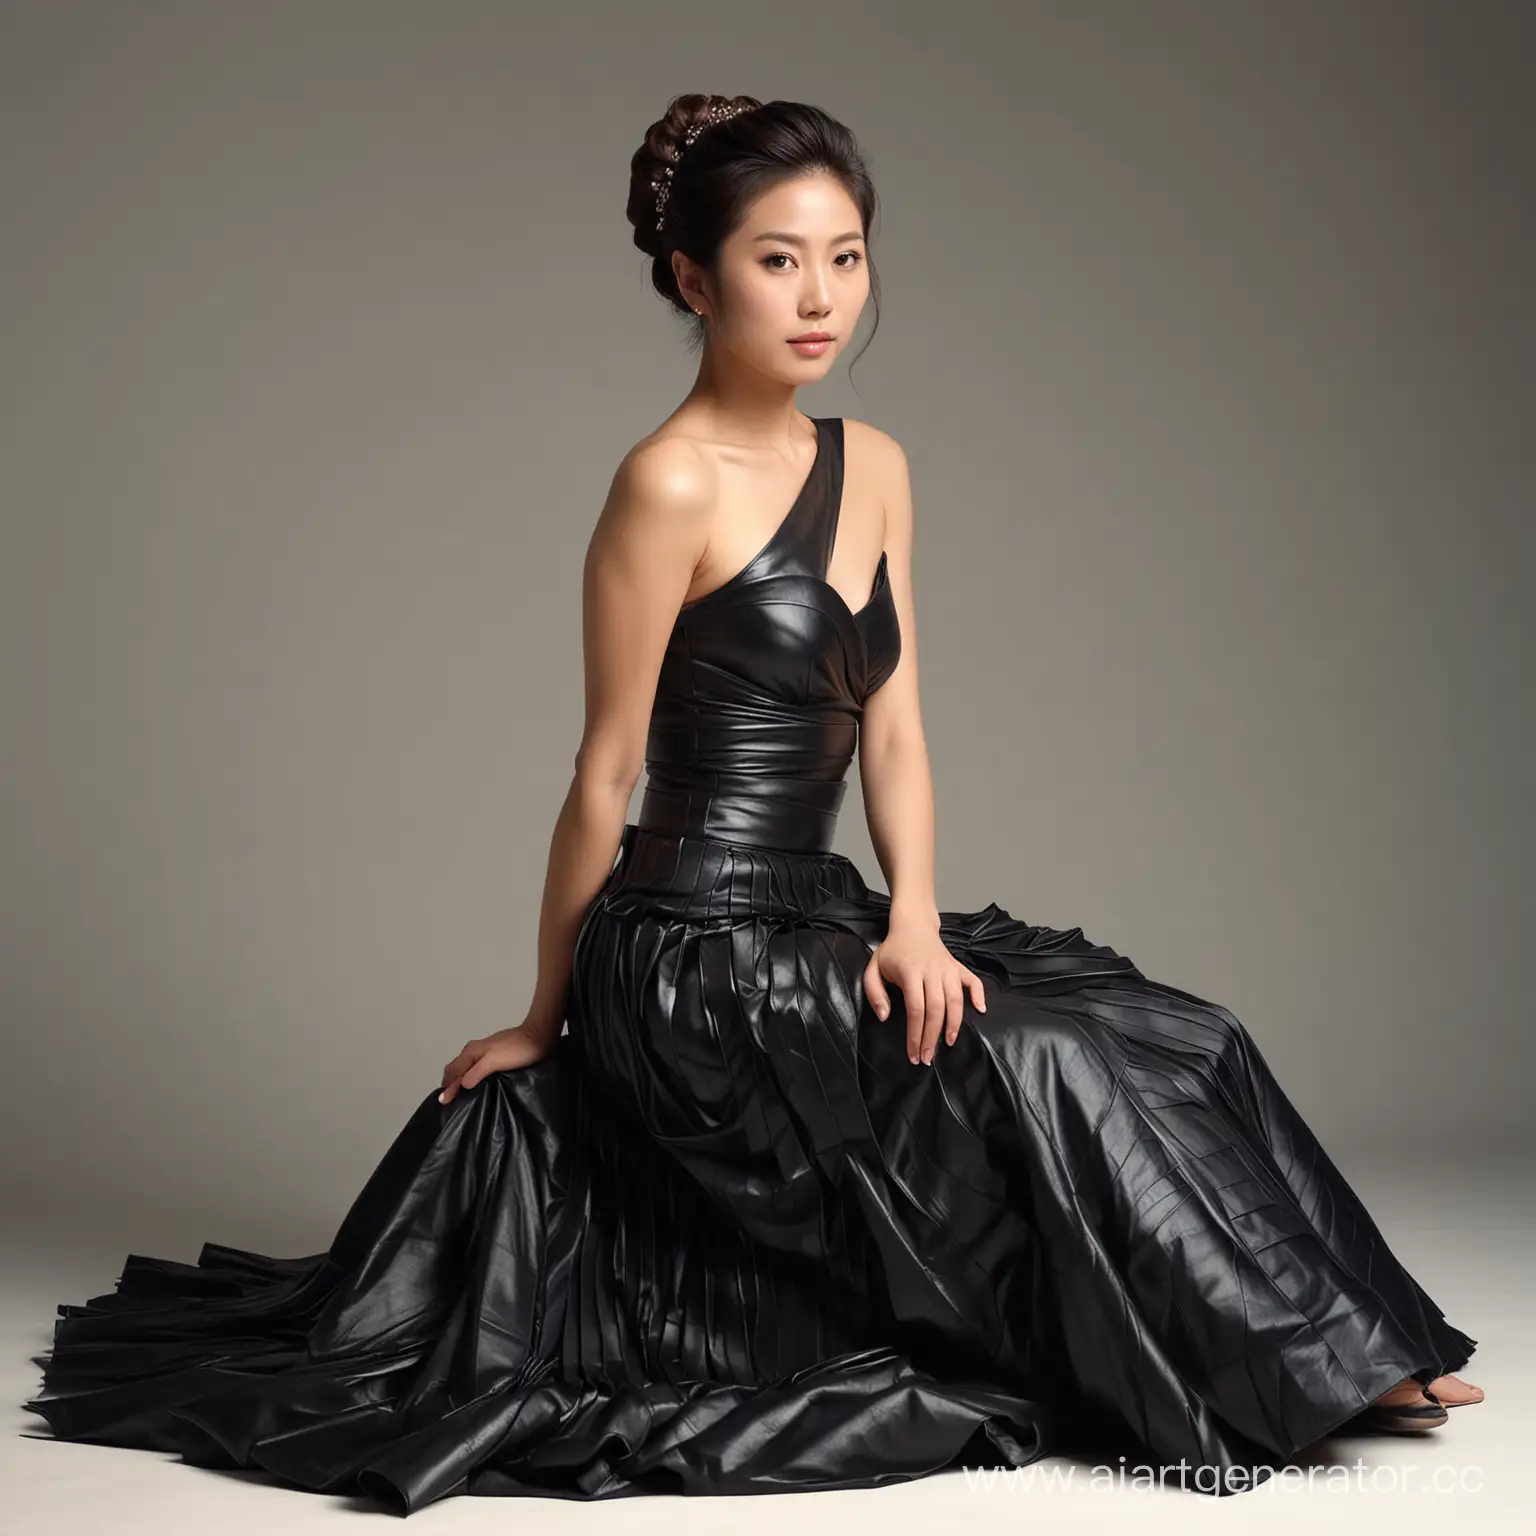 Japanese woman, approximately 30 years old, exuding elegance, seated gracefully on the floor, adorned in a long leather skirt that cascades around her, contrasting with the soft textures of a minimalist setting, hair styled in intricate updo, soft ambient lighting highlighting the contours of her attire, composition focused on the nuances of her posture and expression, dramatic lighting, ultra fine, digital painting.